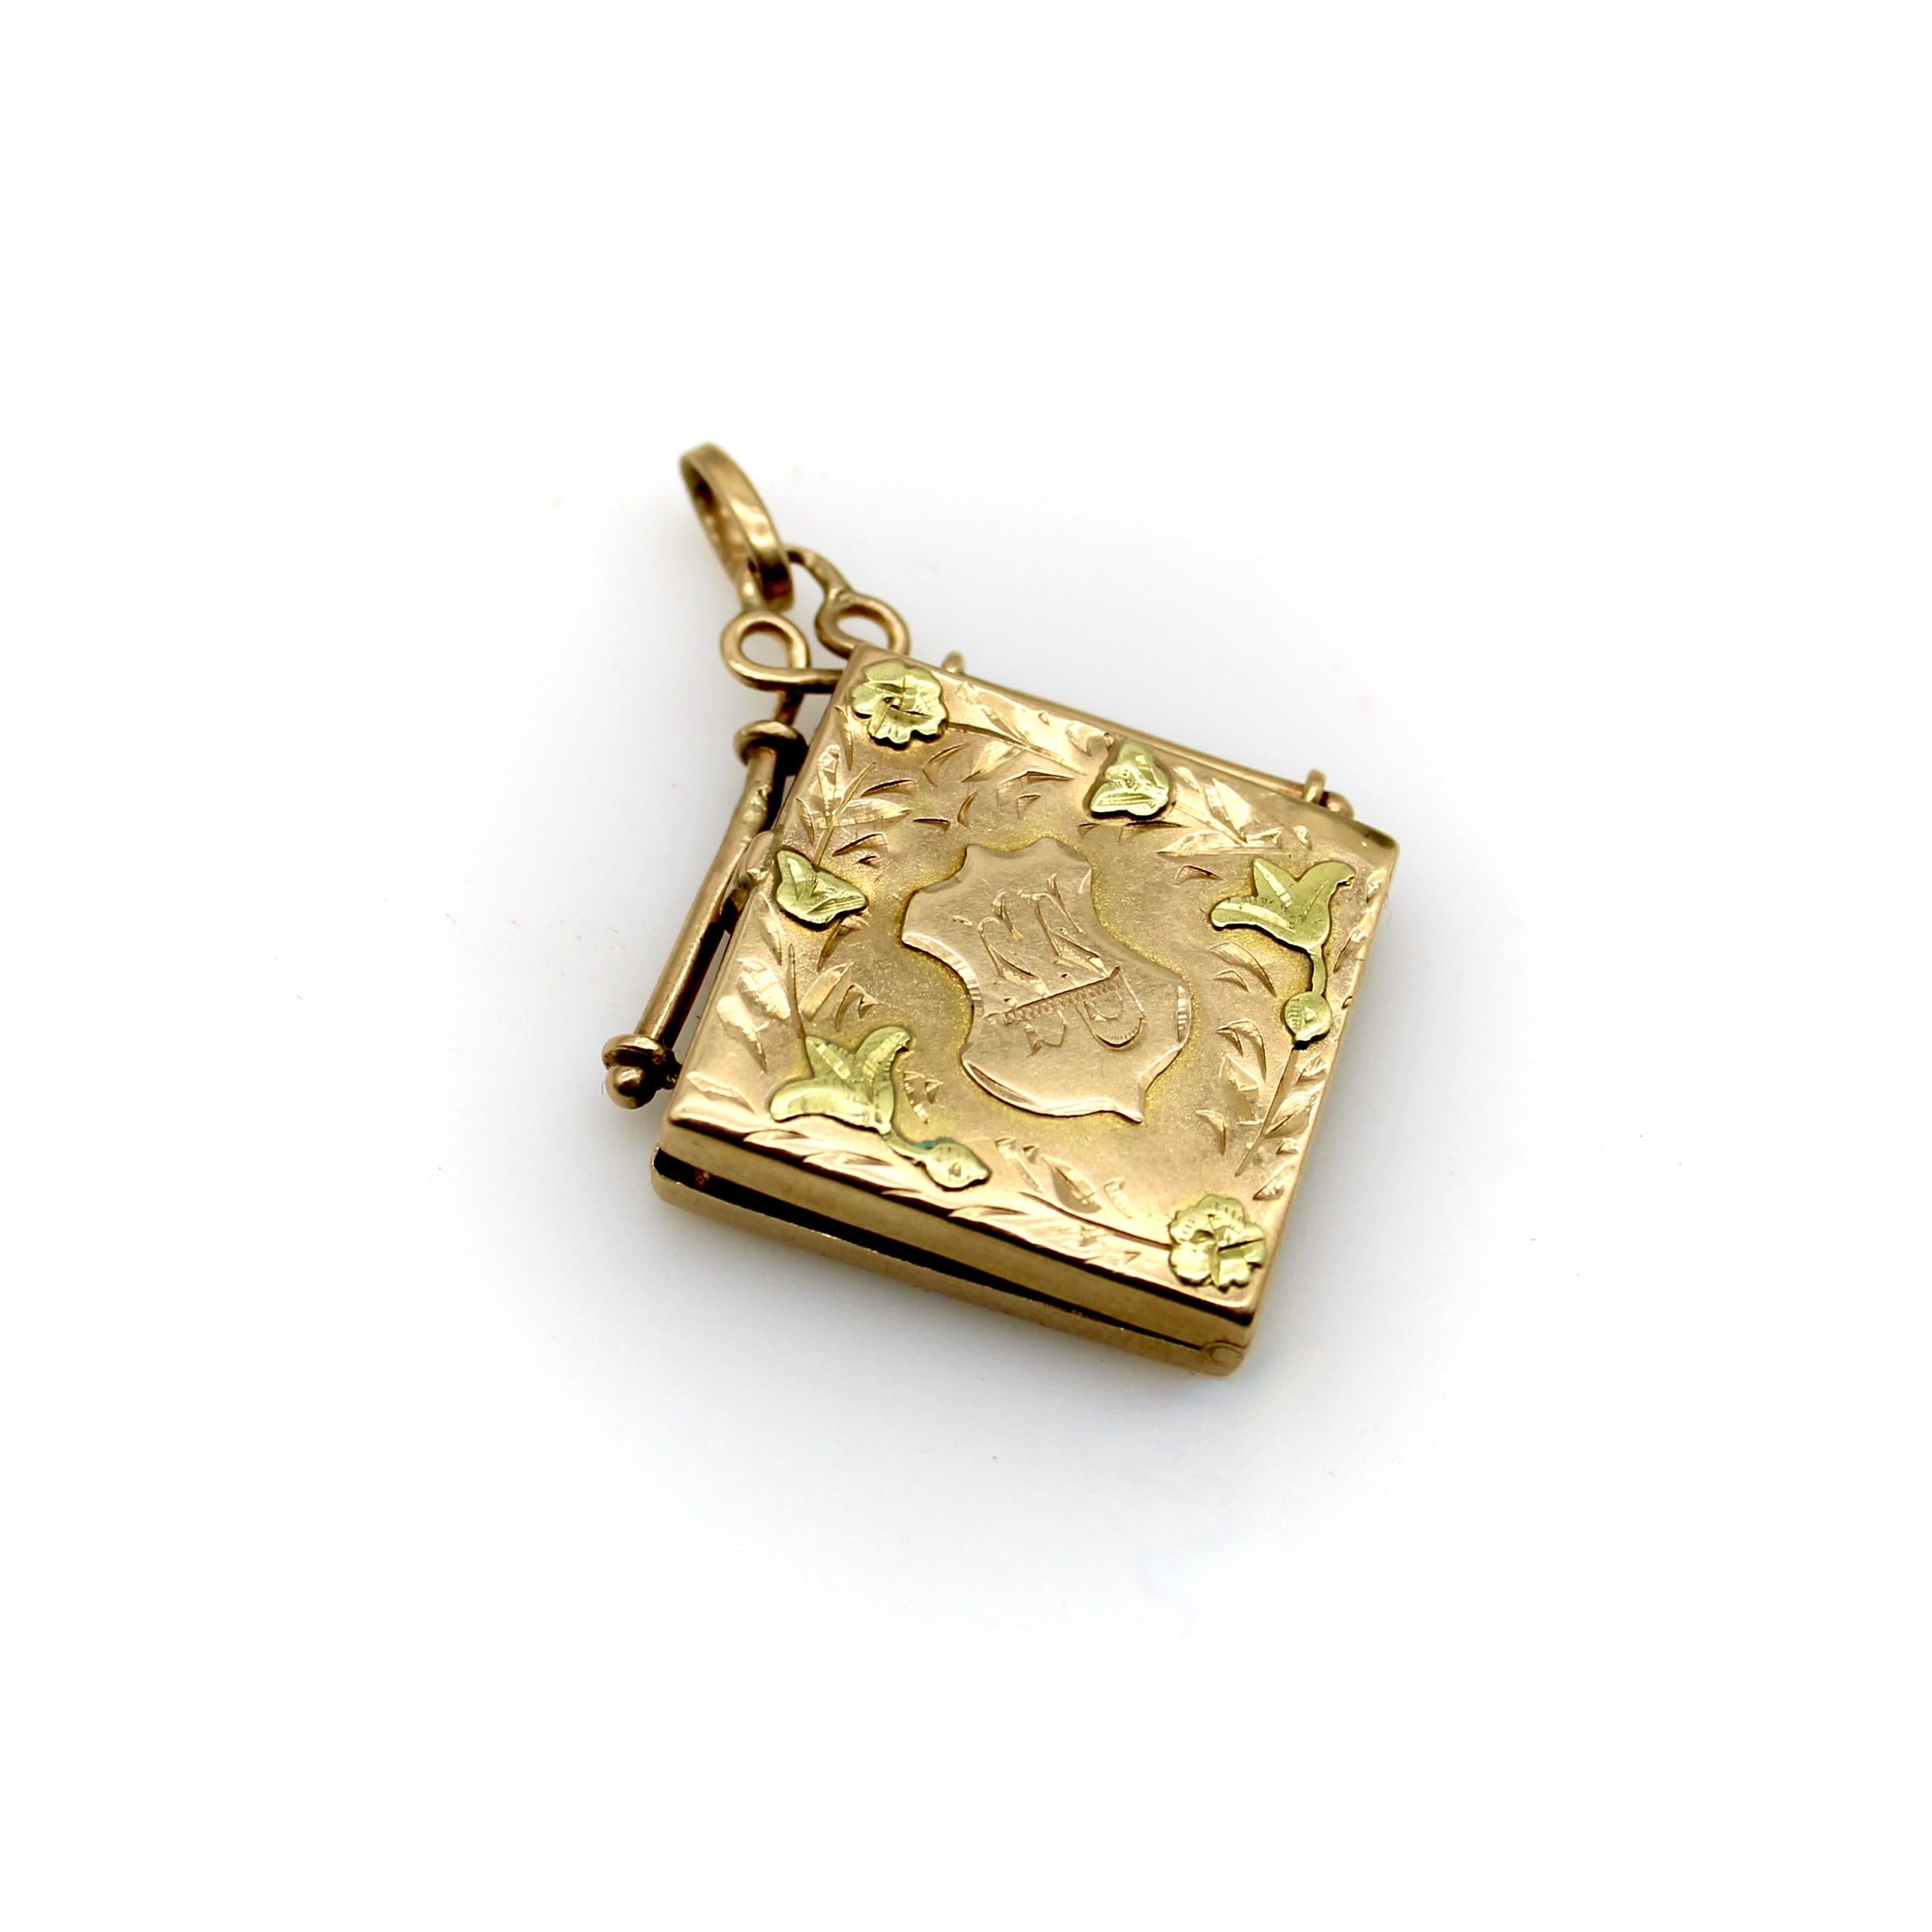 This 14k gold Victorian square fob locket is hand engraved with a shield surrounded by a vine of flowers and leaves. The shield has the initials S.S. with a P laid across it in a unique shape. The locket has two tones of gold—a rosy hue as the base